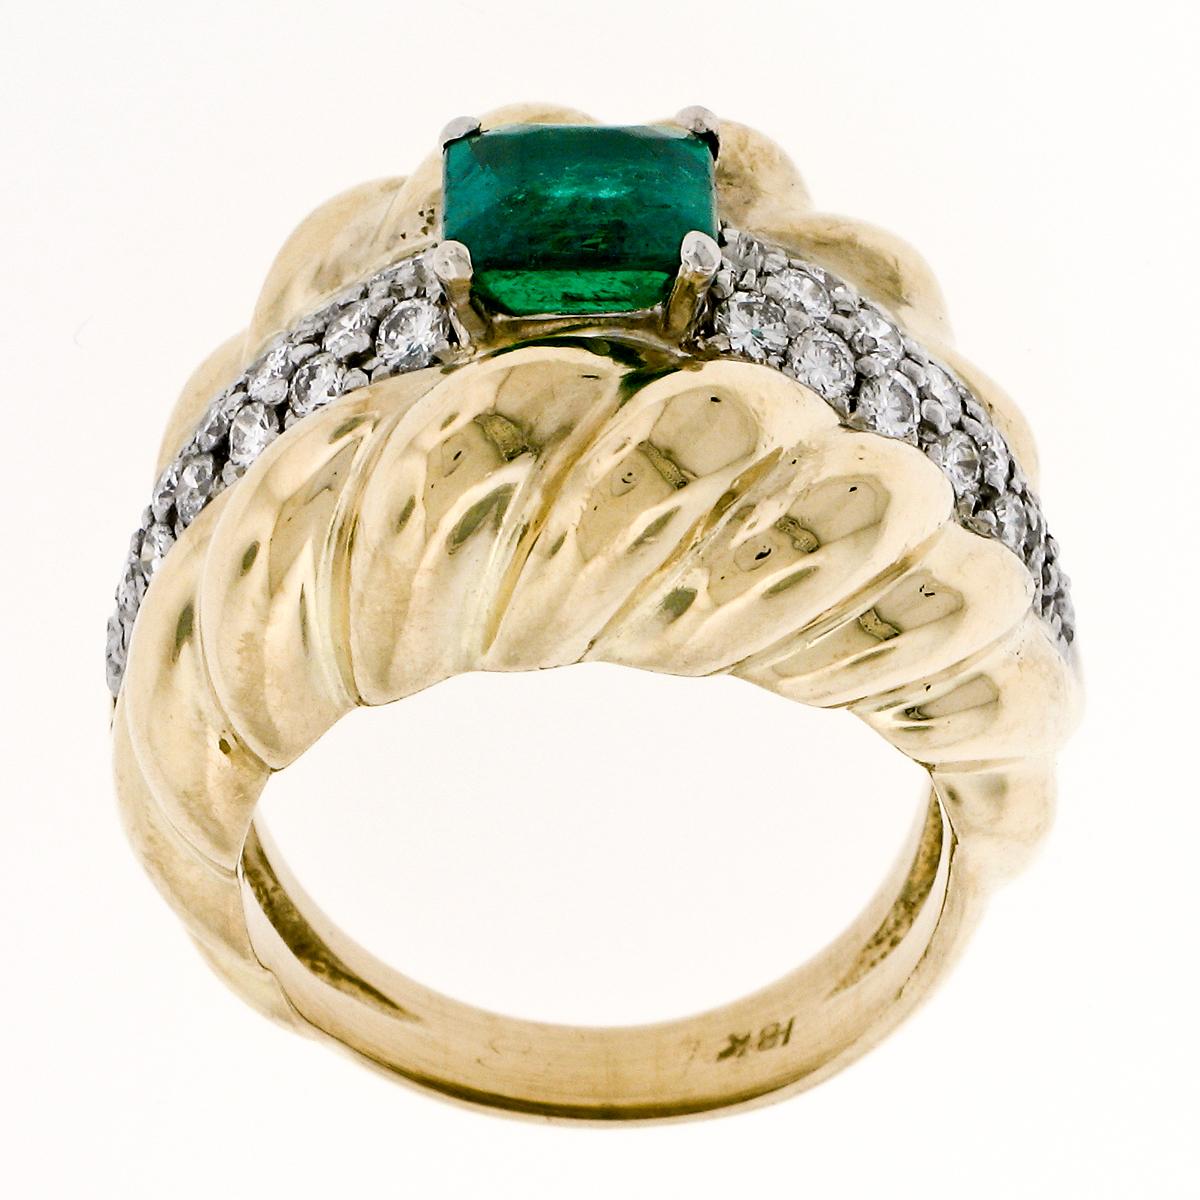 Vintage 18K TT Gold 2.29ctw GIA Colombian Emerald & Diamond Cocktail Ring For Sale 3